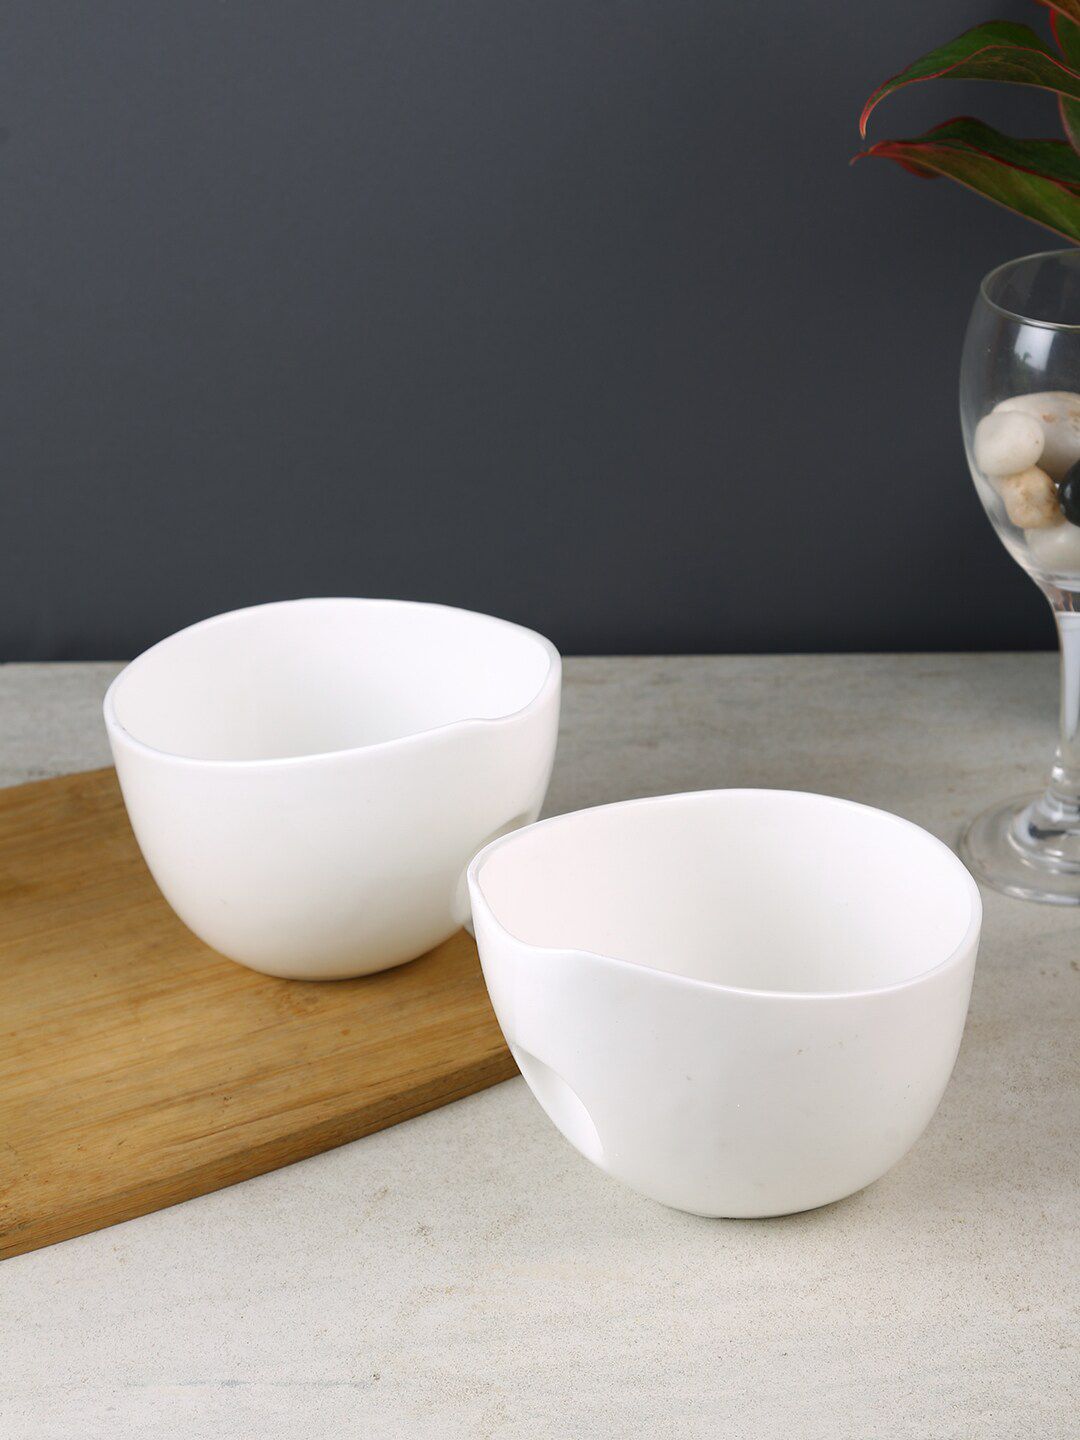 Aapno Rajasthan Set of 2 White Profound Noodle/Cereal Bowls Price in India